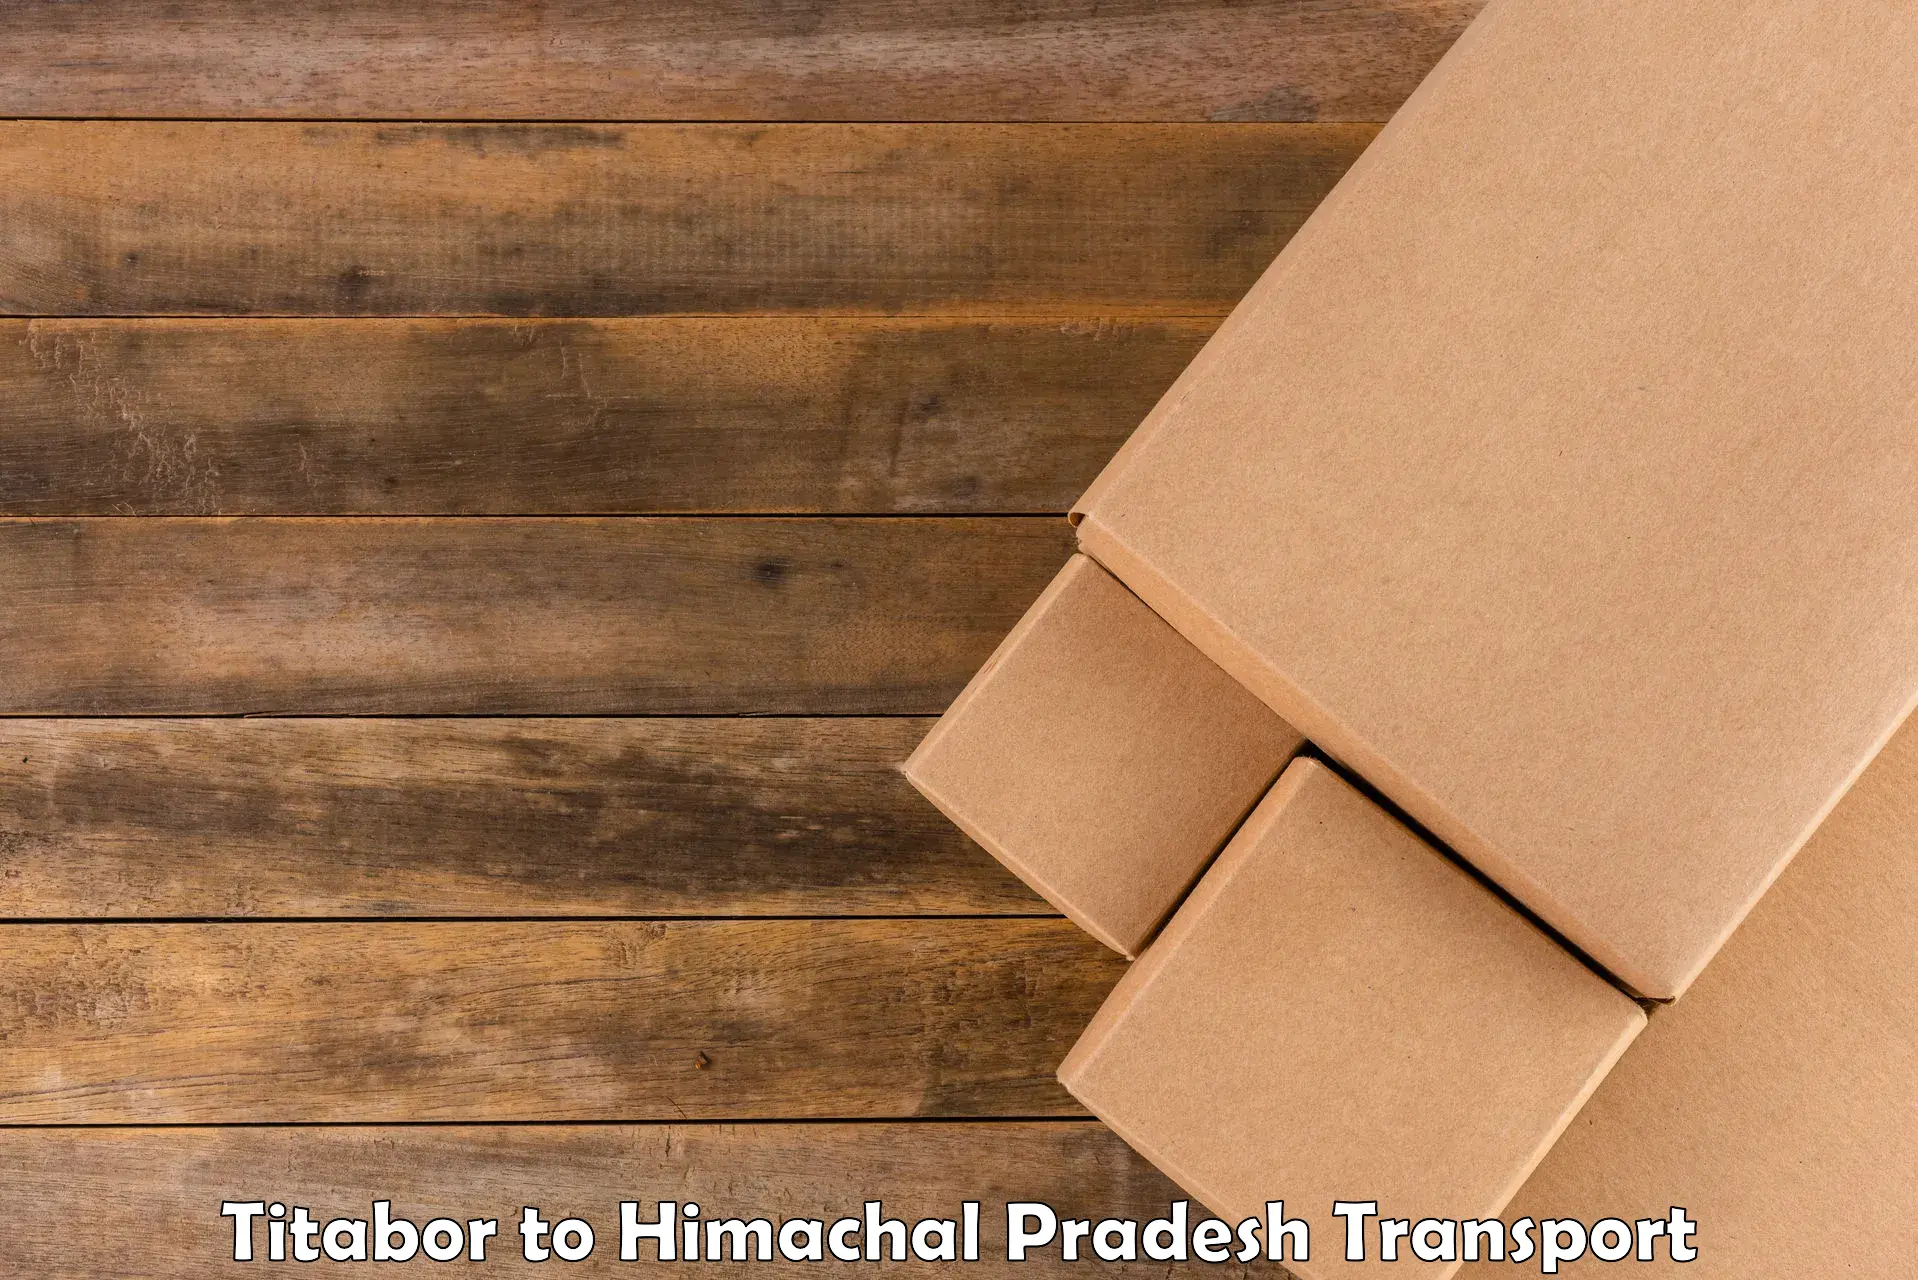 Container transport service Titabor to Himachal Pradesh